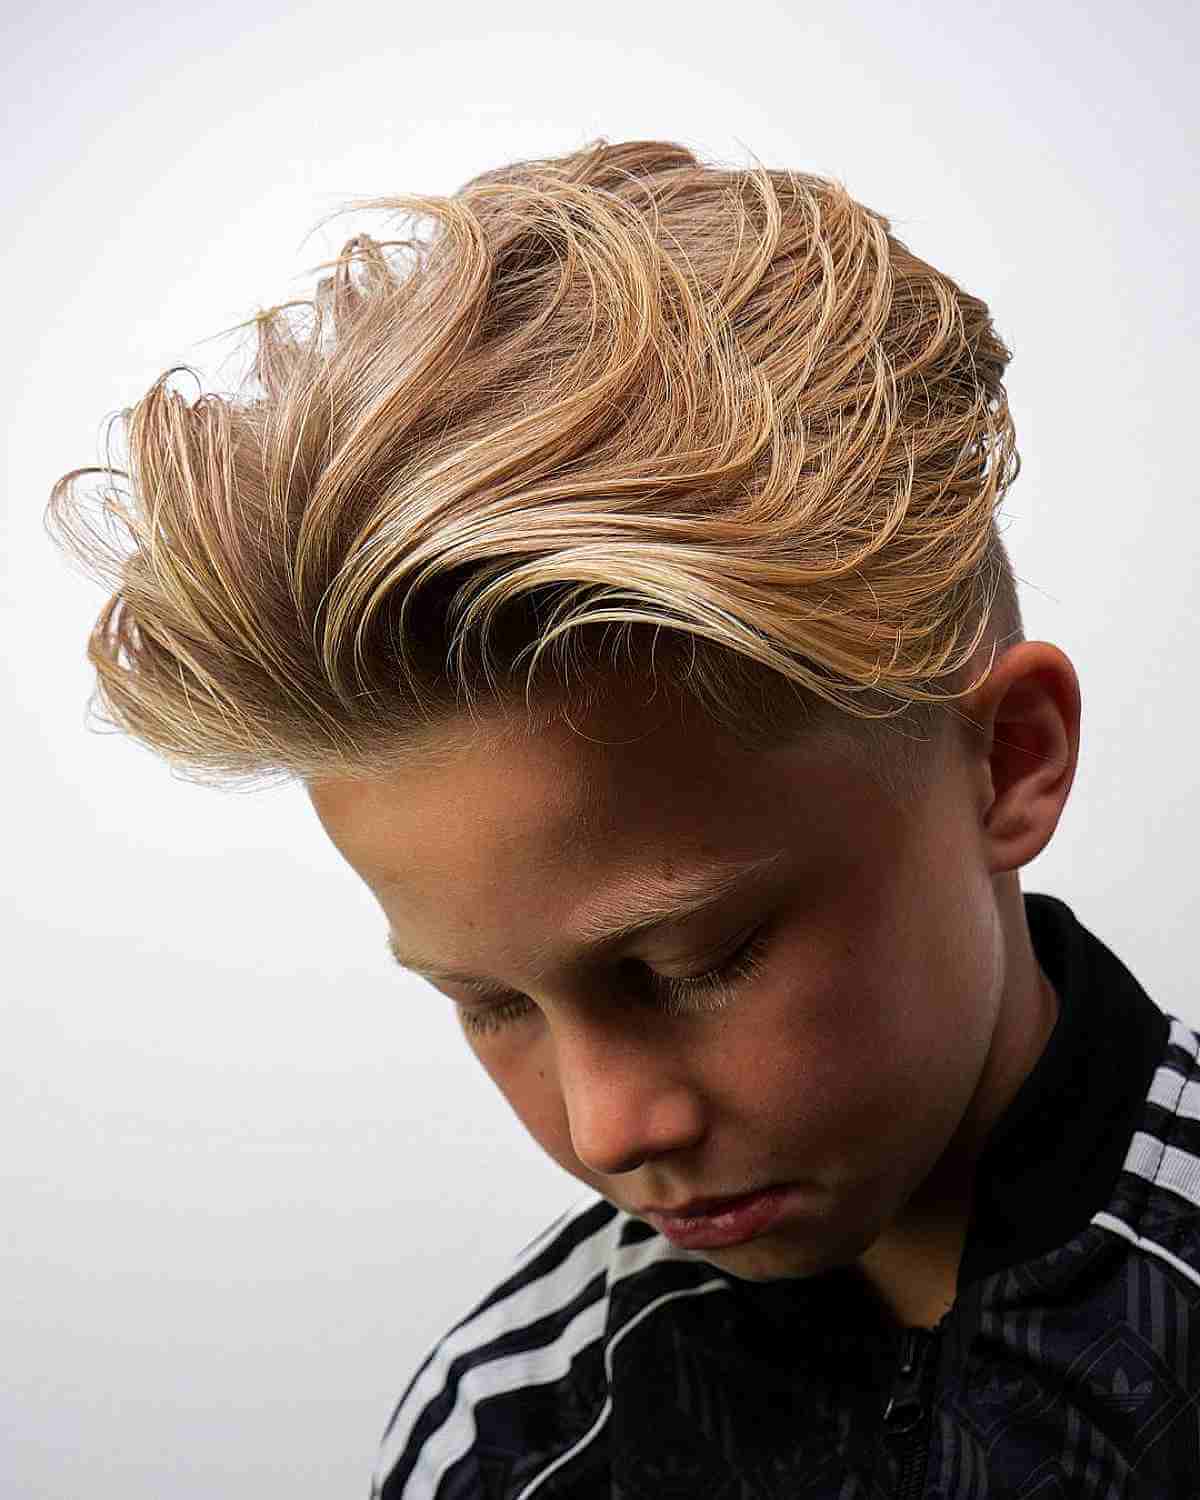 Long Blonde Flowing Hair on Top for Younger Boys